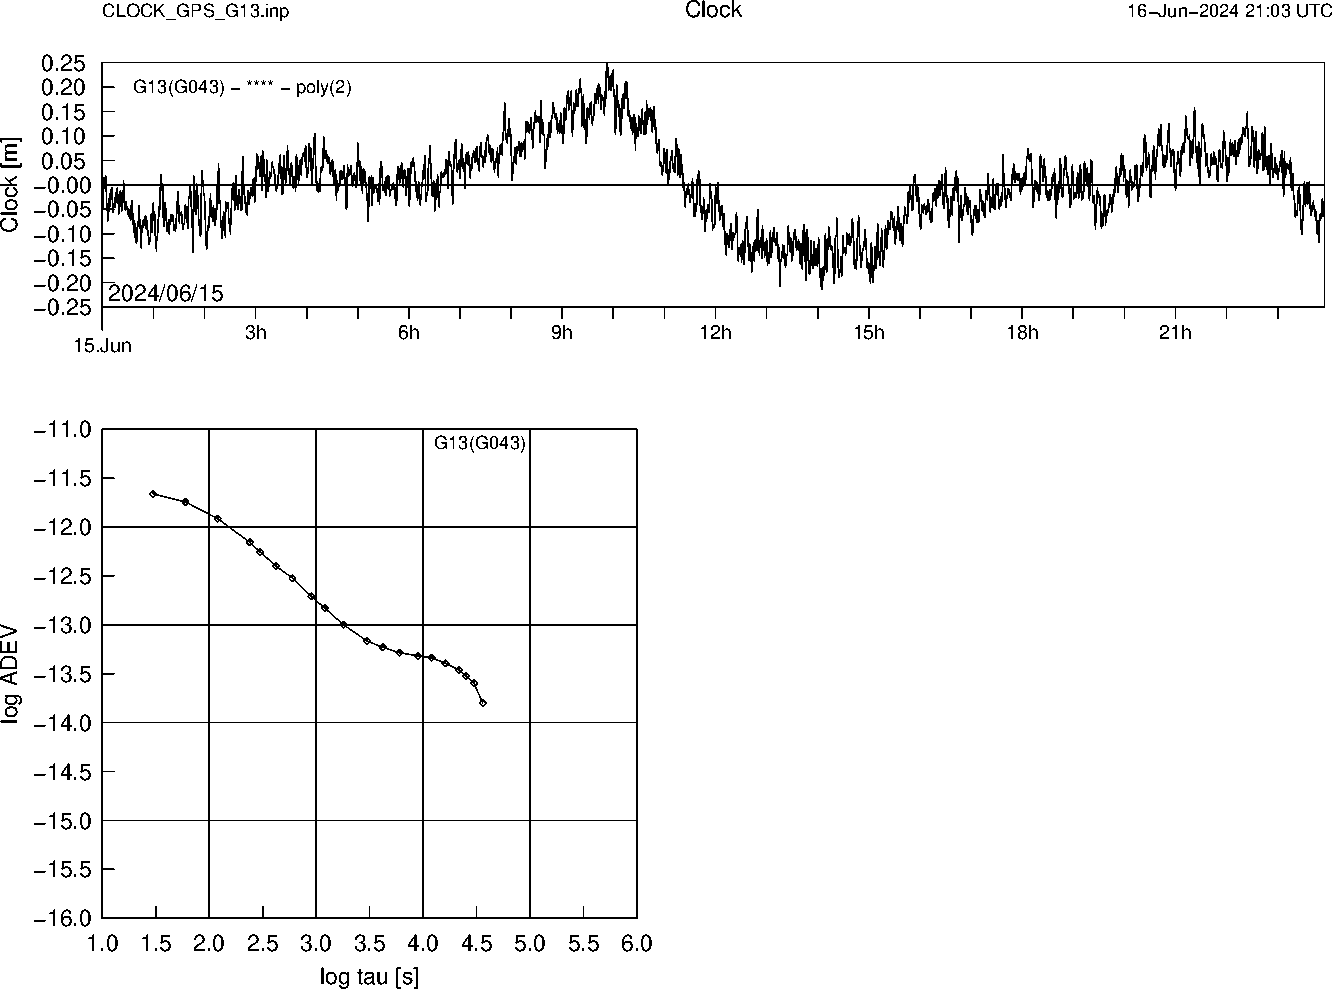 GPS G13 Clock Time Series and Allan Deviation